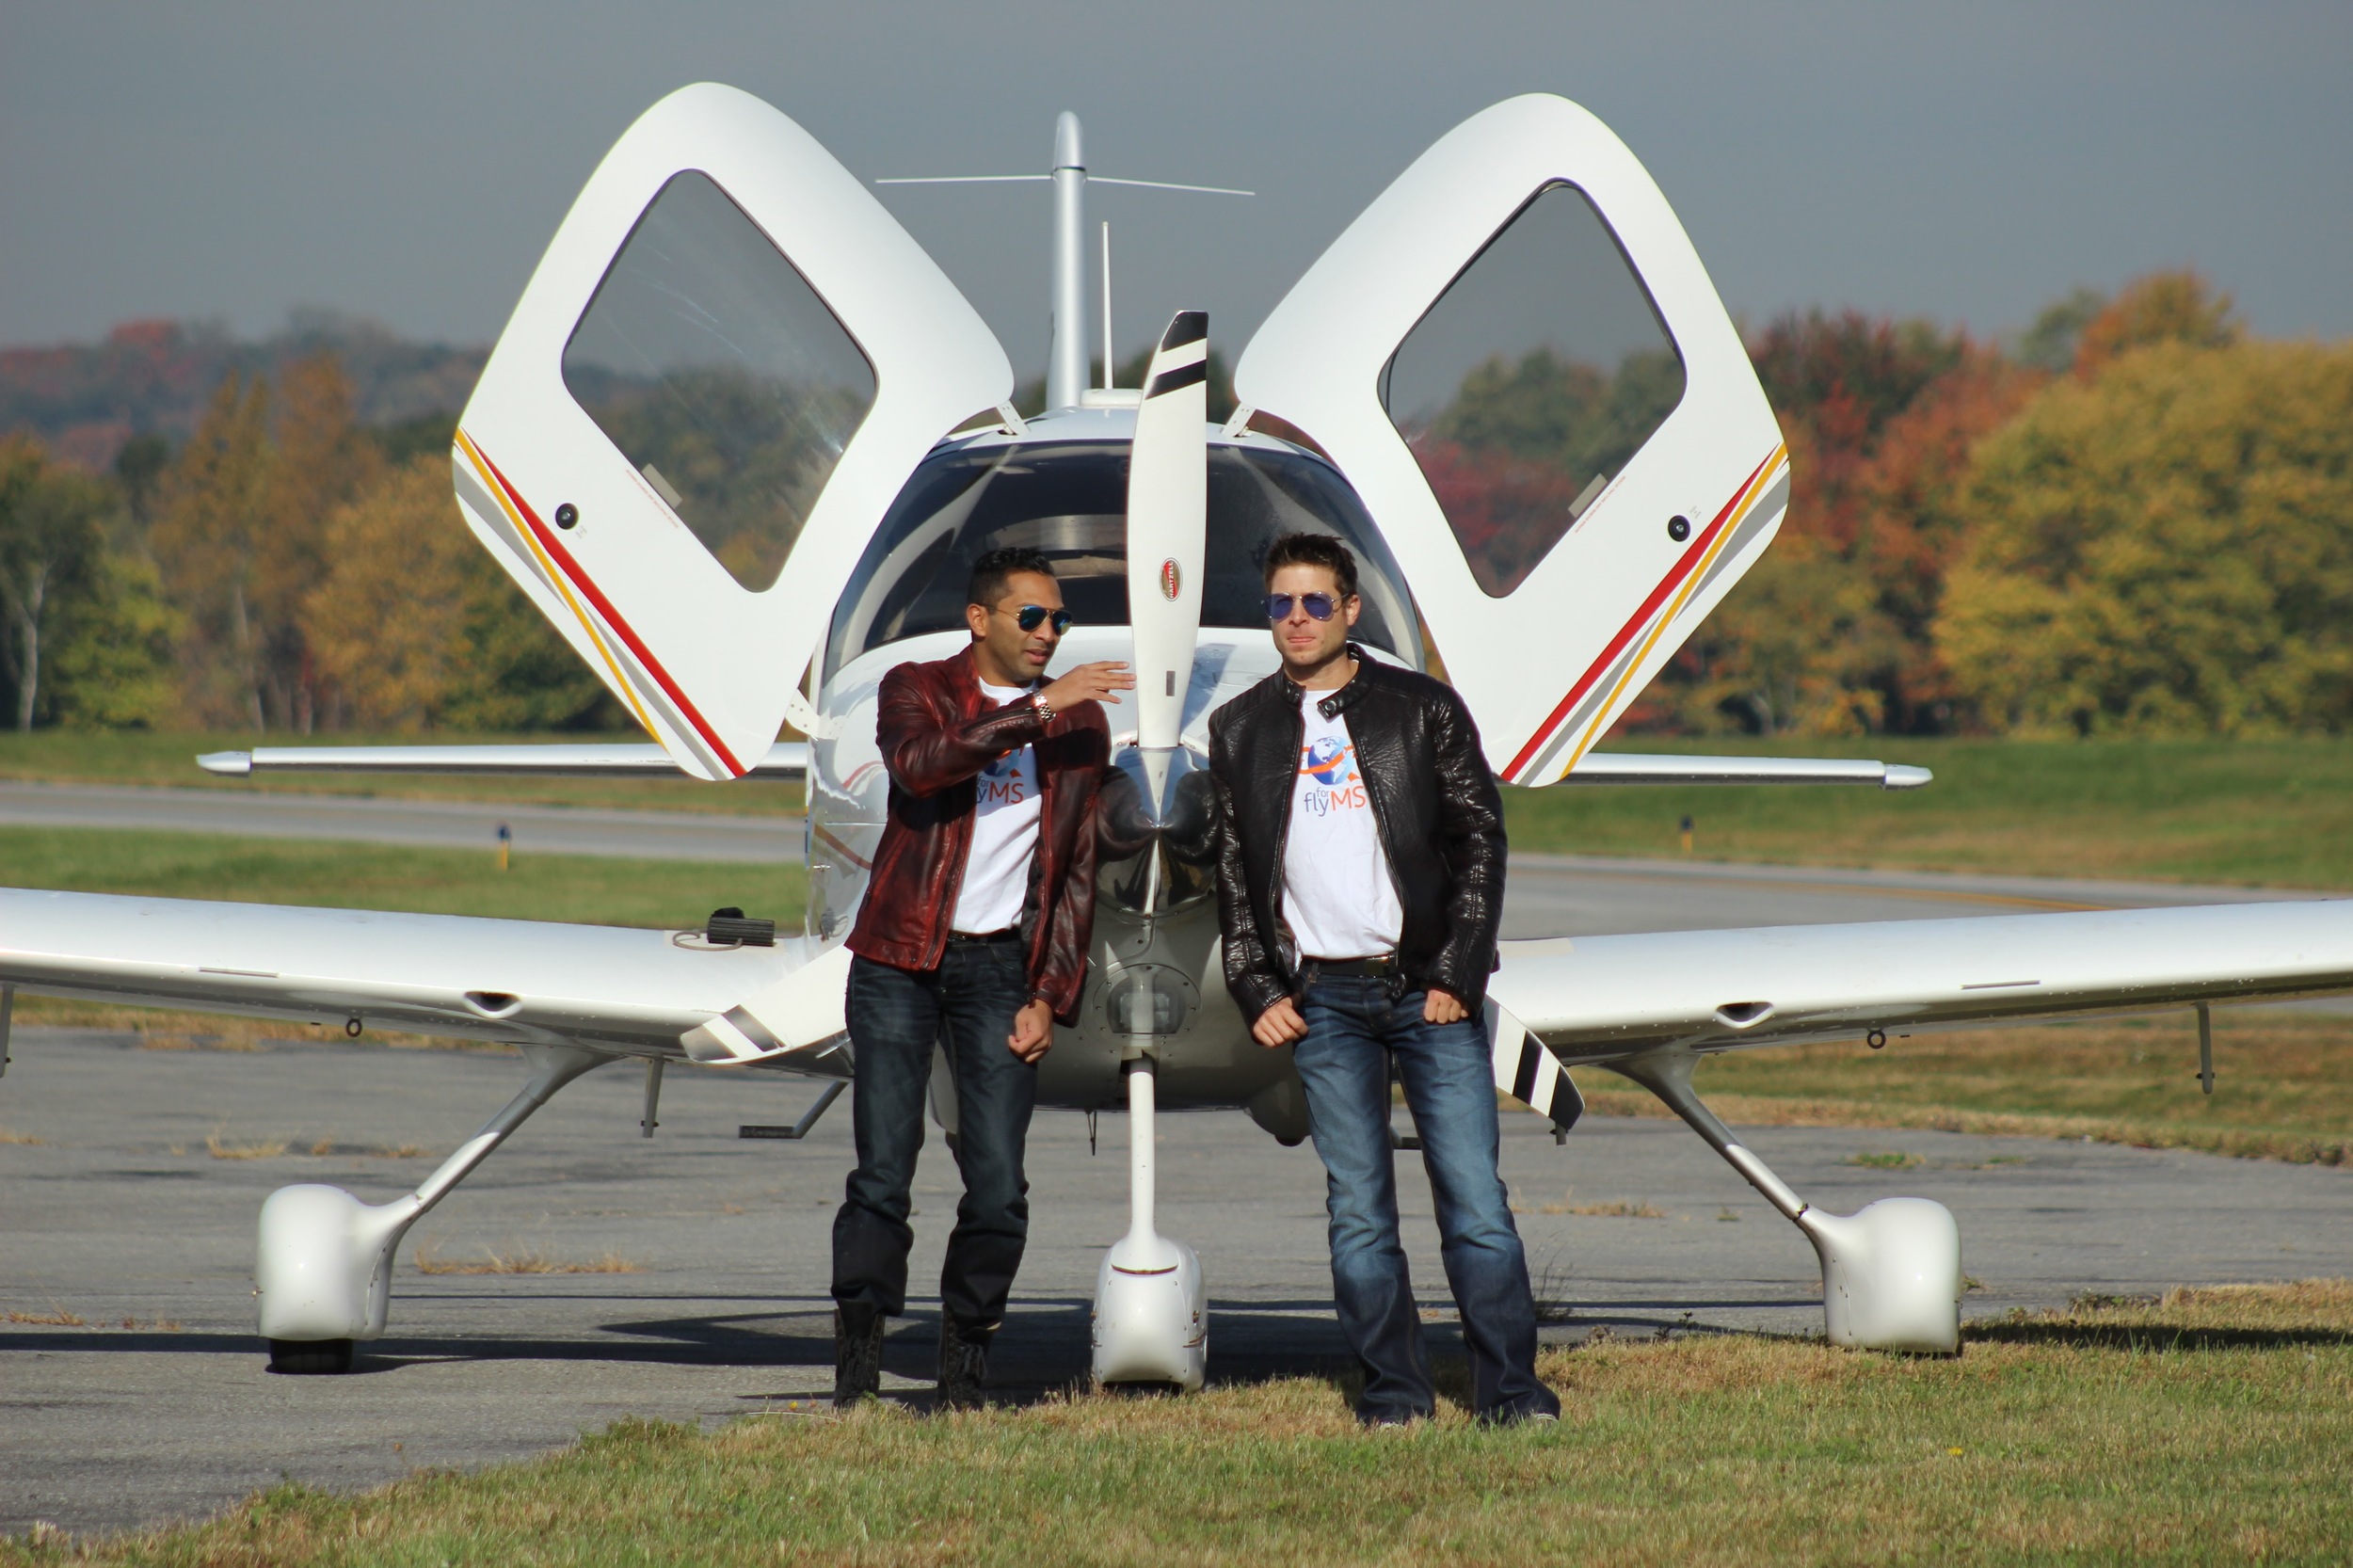   FLY FOR MS IS SPREADING ITS WINGS OVER THE AMERICAS   In November 2015, two American pilots set out on an extraordinary journey for Multiple Sclerosis. 